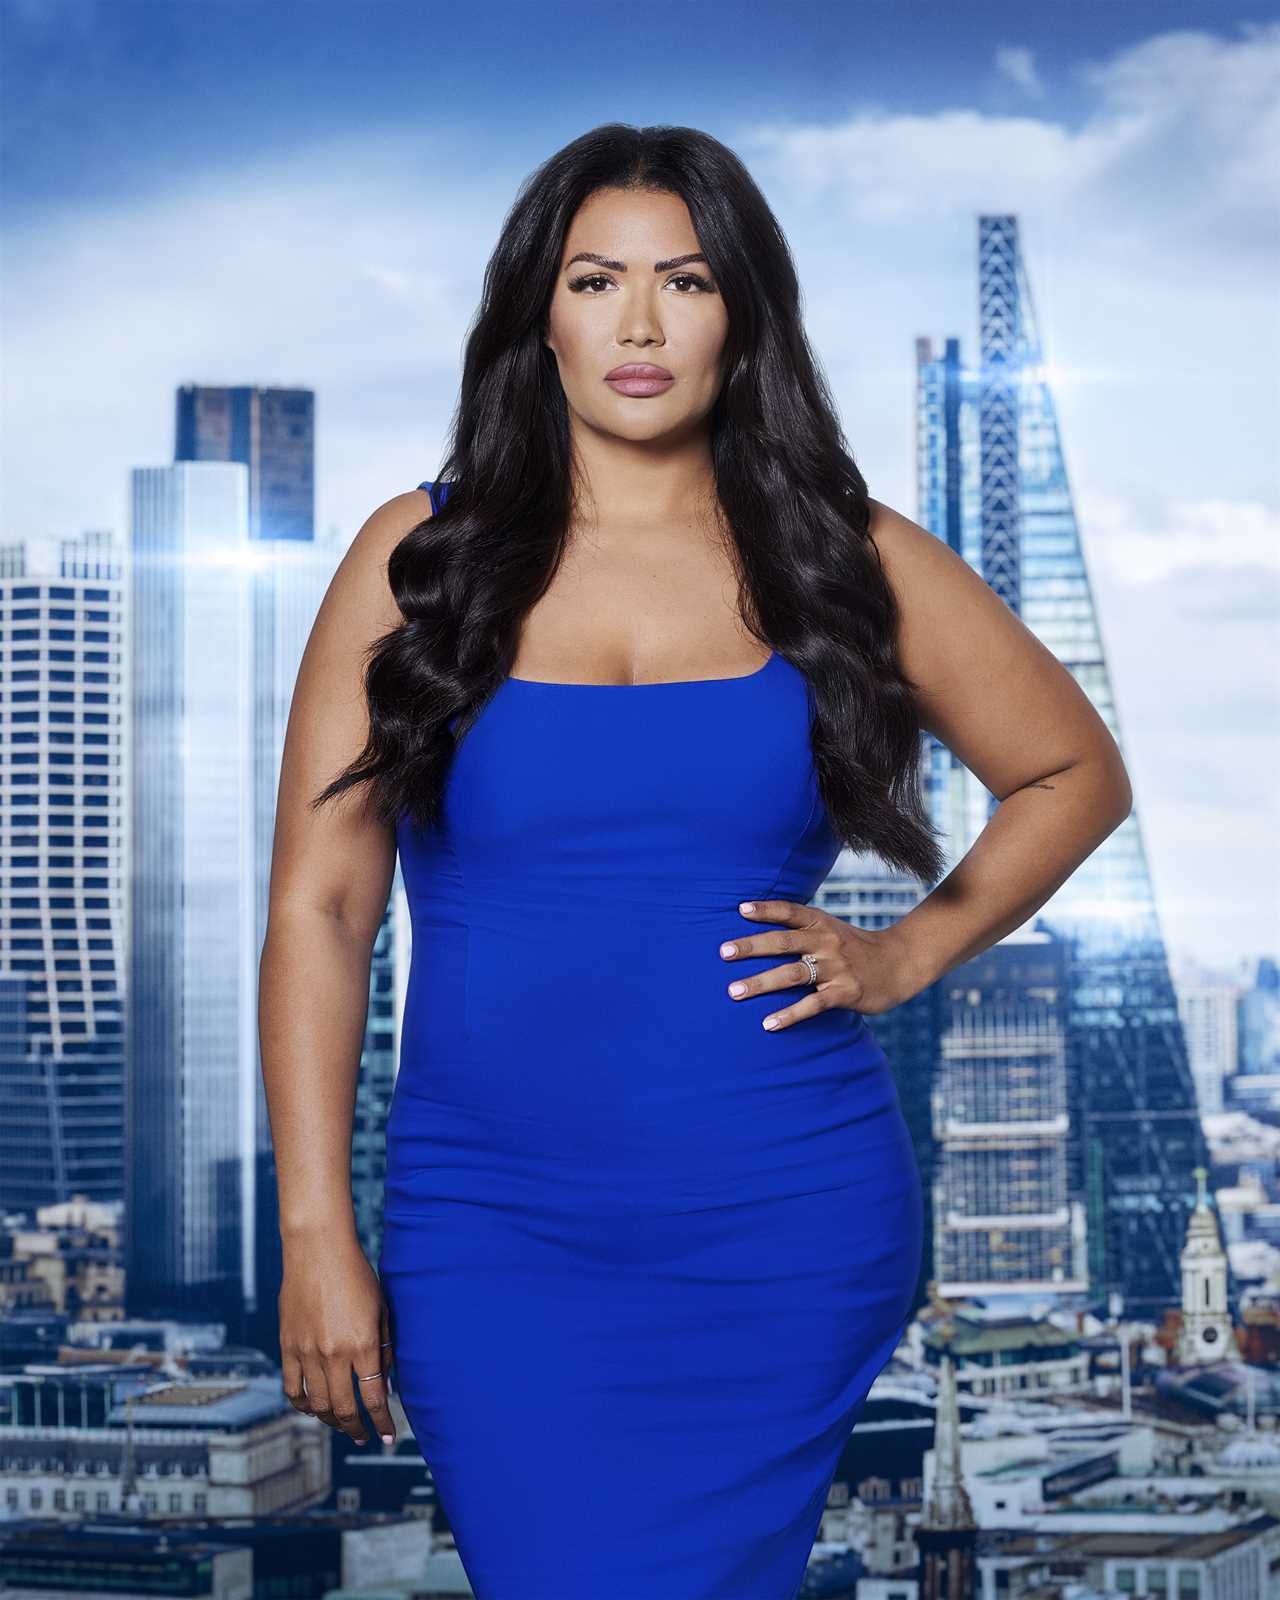 Meet Apprentice star Rochelle Anthony dubbed ‘Kim Kardashian of business’ – with eye-popping Instagram snaps